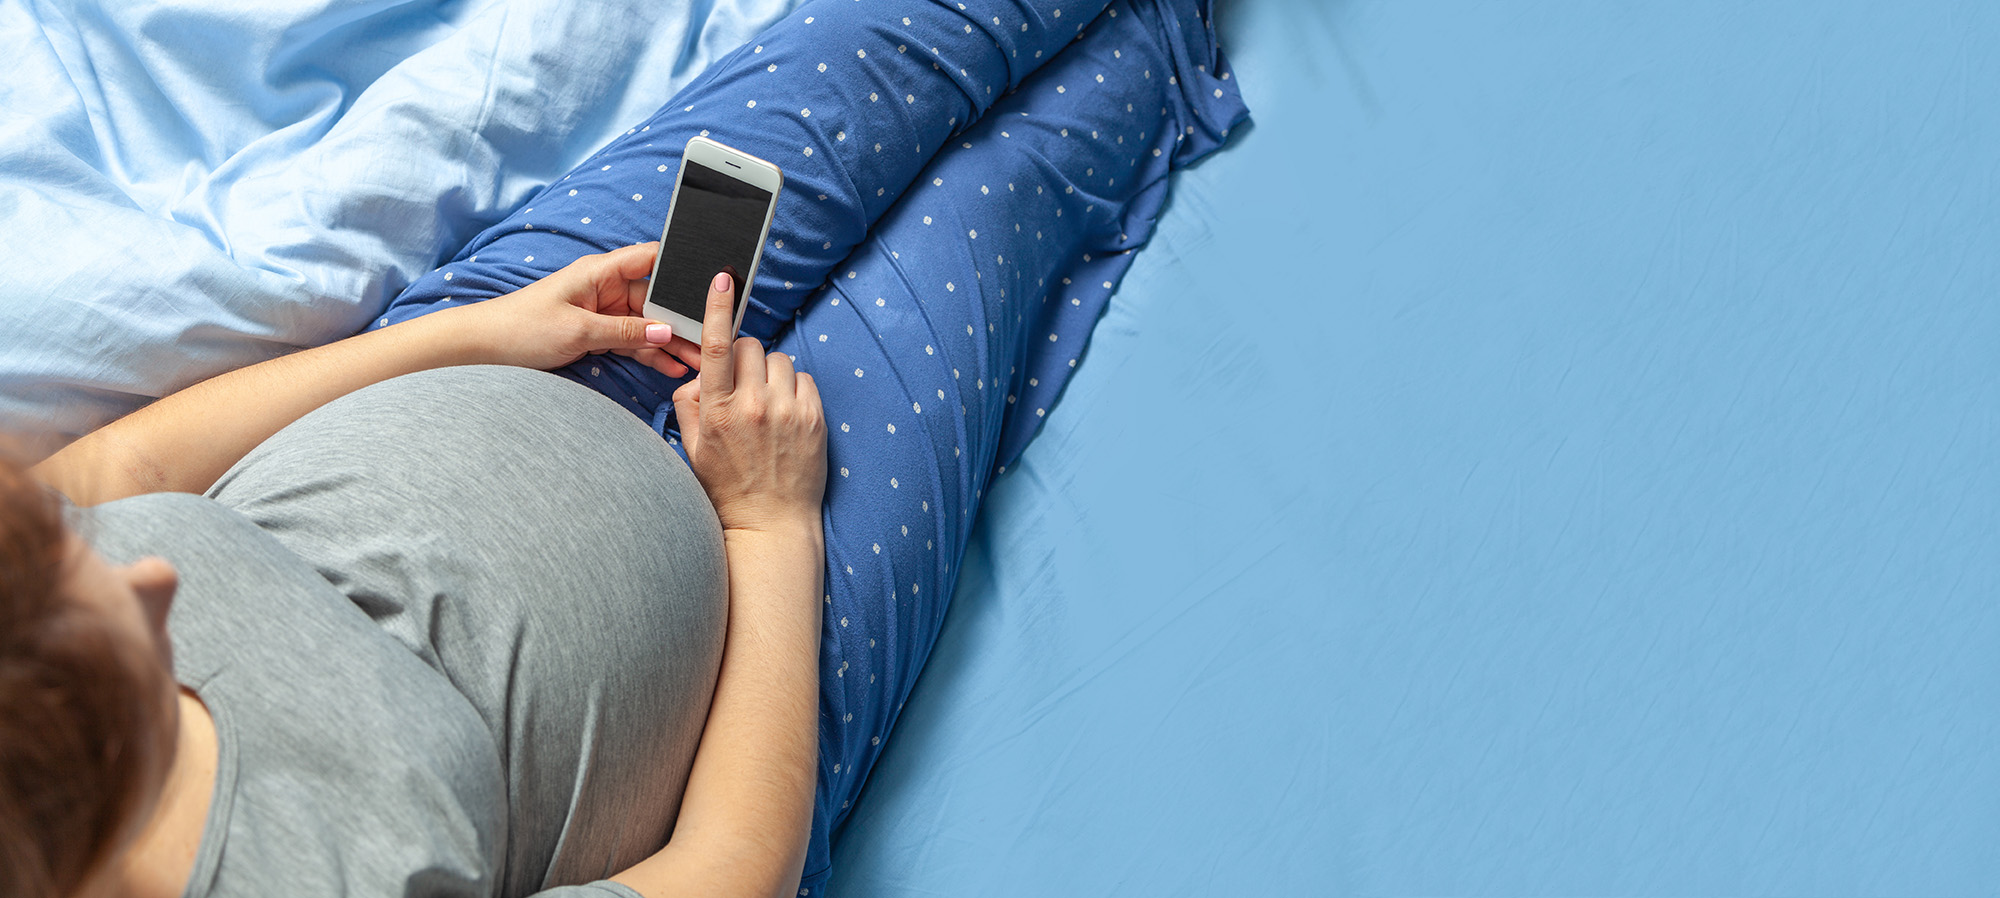 Pregnant woman with belly holds smartphone in hands. Copy space for text